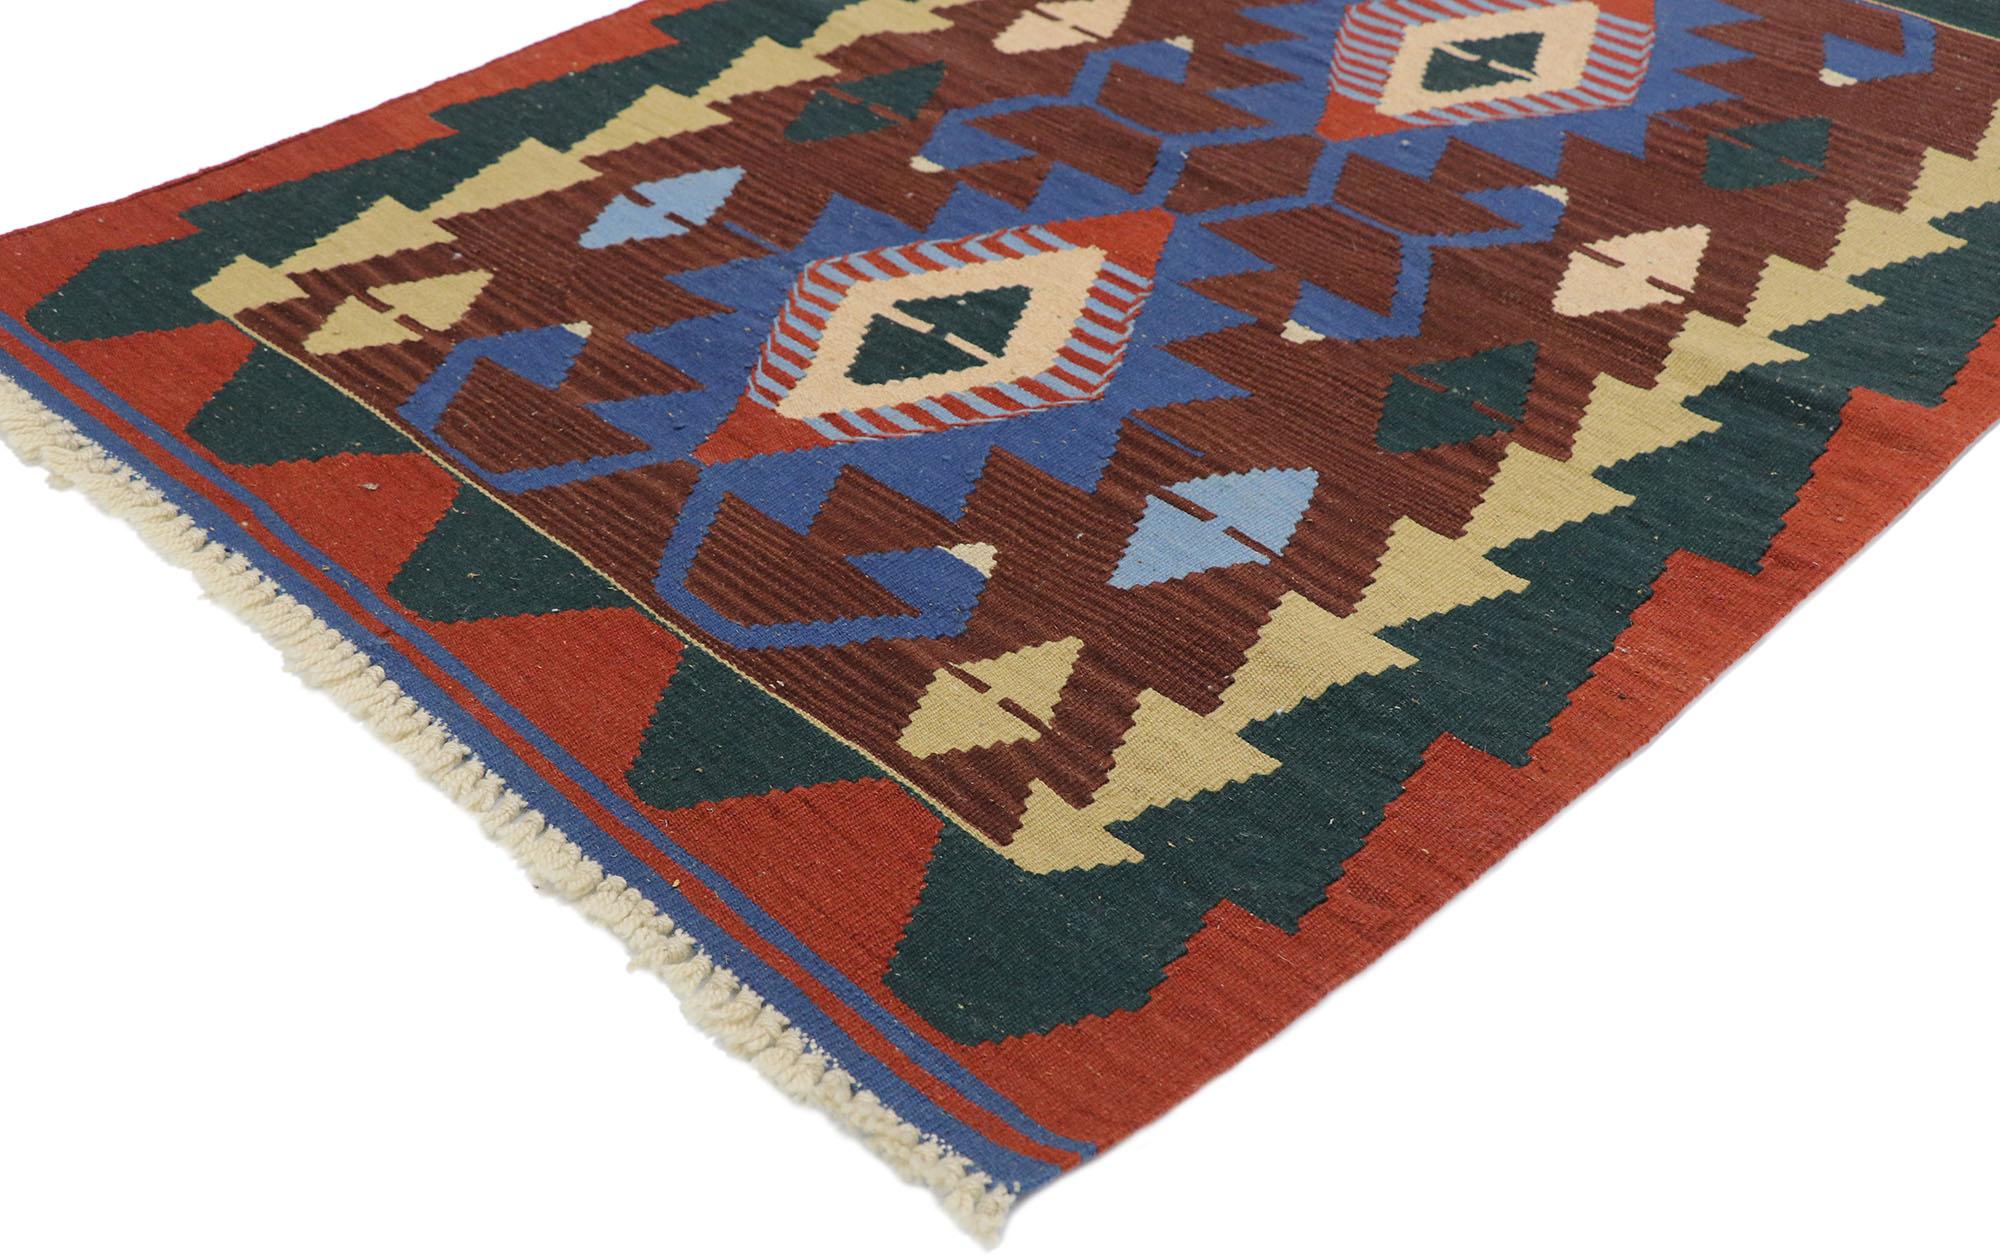 77838, vintage Persian Shiraz Kilim rug with Tribal style. Full of tiny details and a bold expressive design combined with vibrant colors and tribal style, this hand-woven wool vintage Persian Shiraz kilim rug is a captivating vision of woven